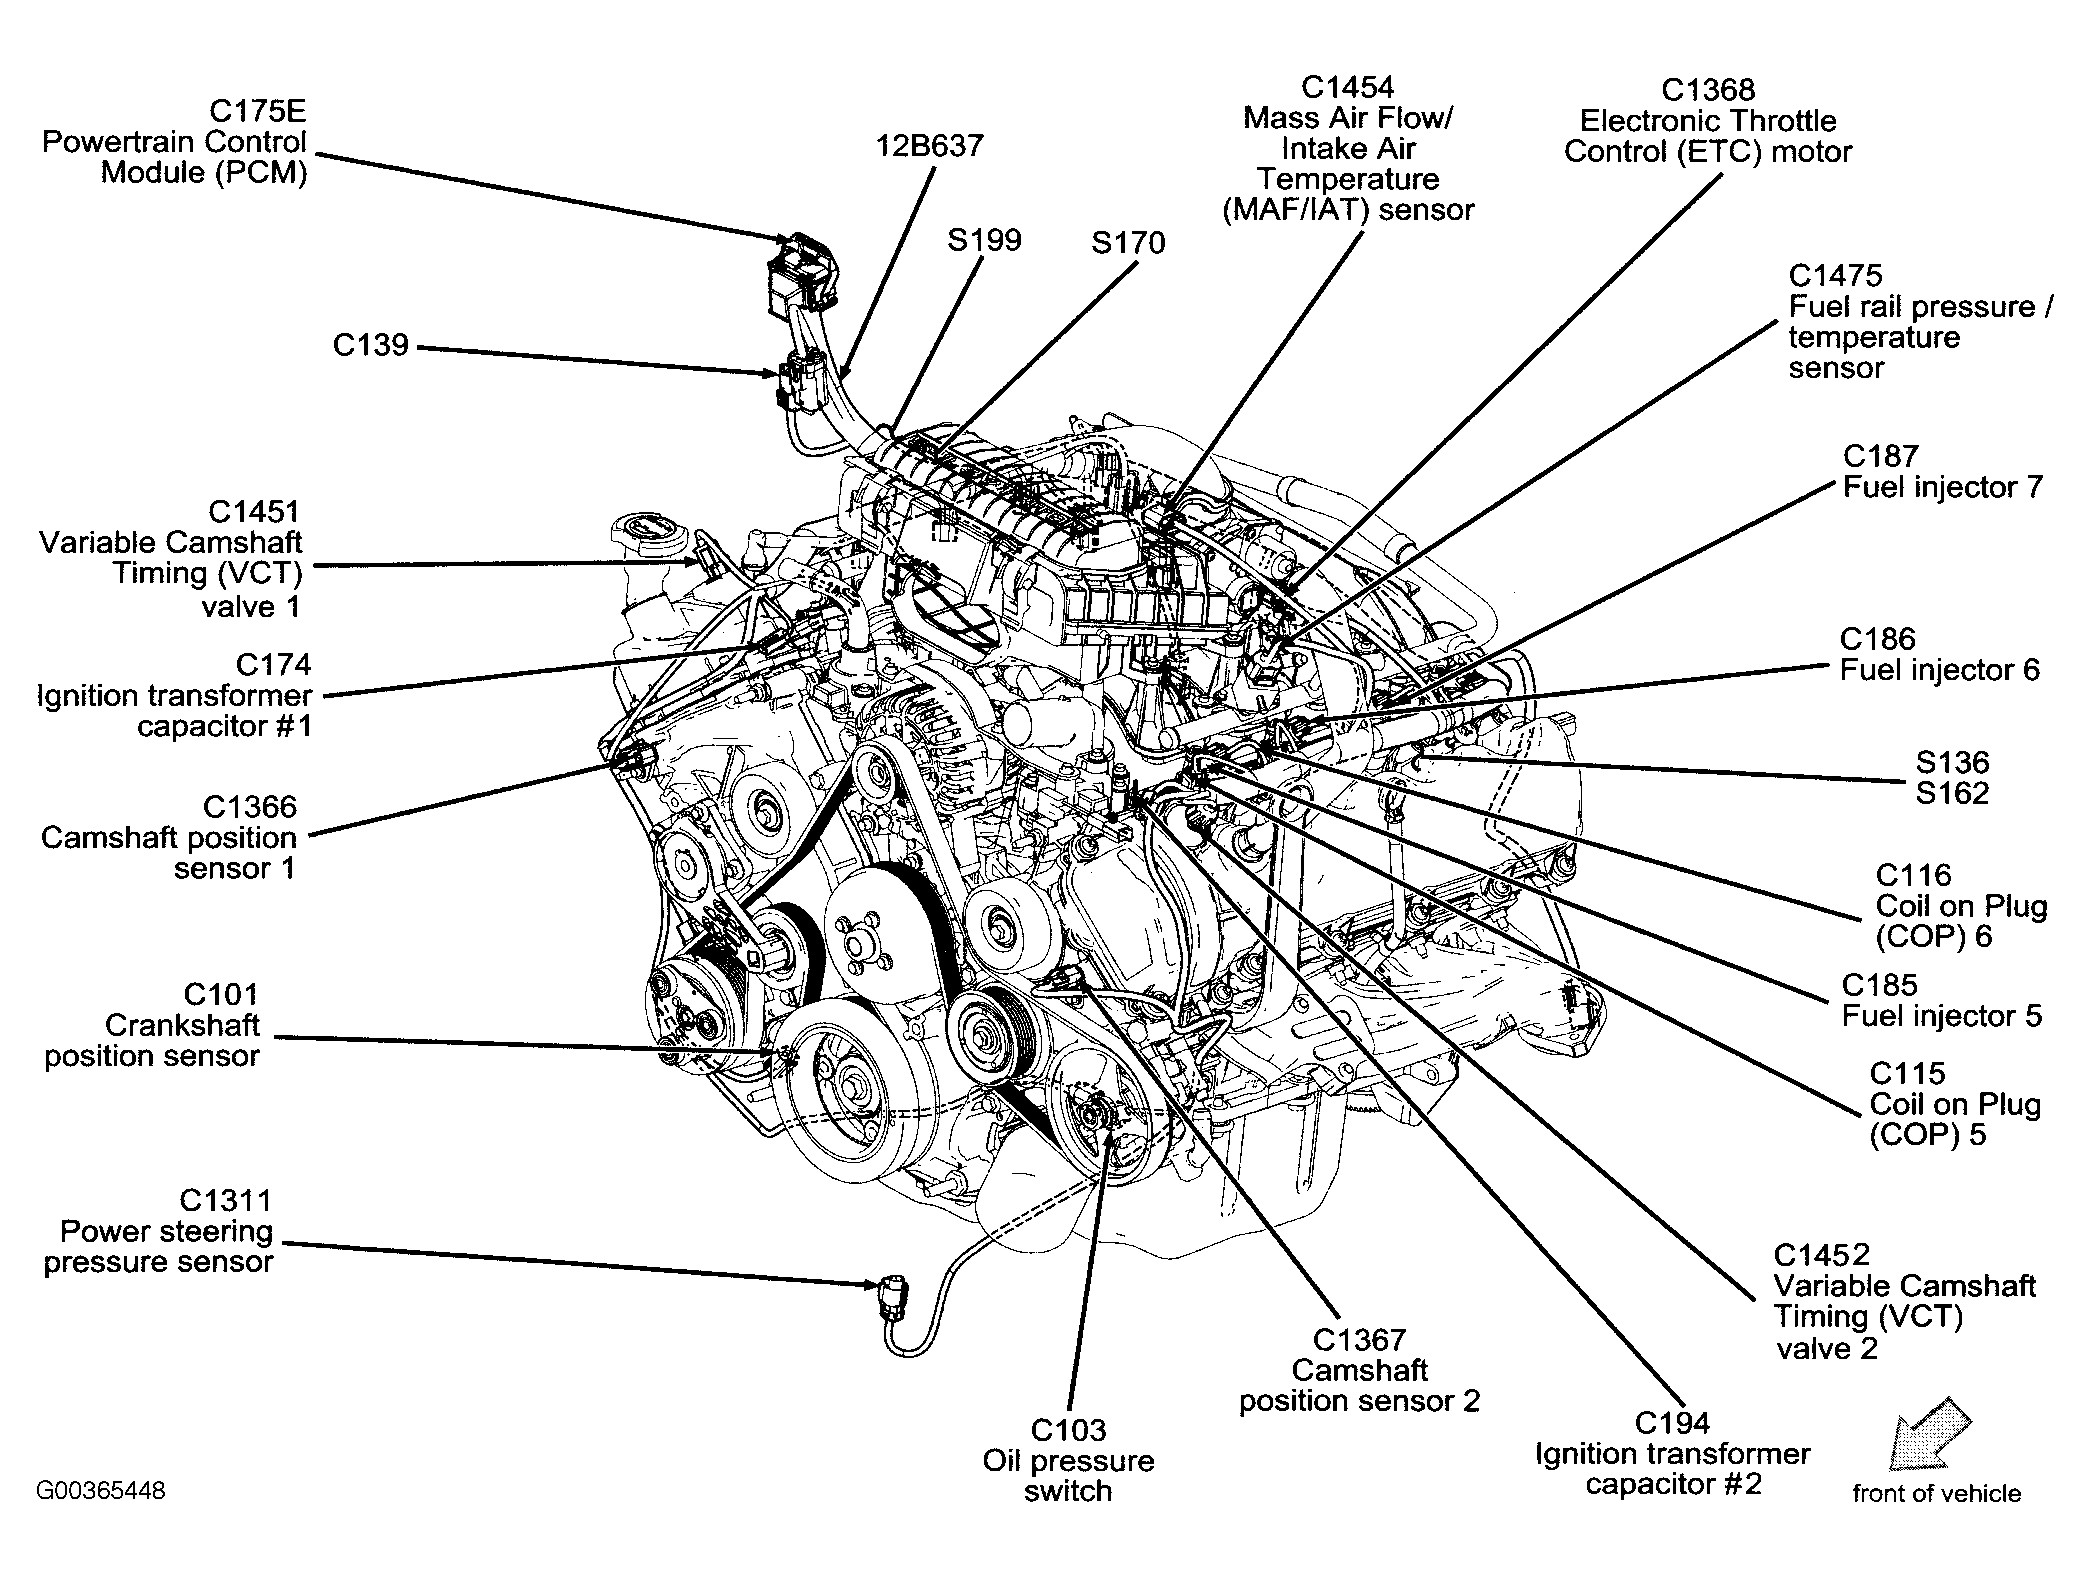 2006 ford F150 Parts Diagram ford F 150 Parts Diagram 07 21 Crank Fine Portrait Heres some Of 2006 ford F150 Parts Diagram